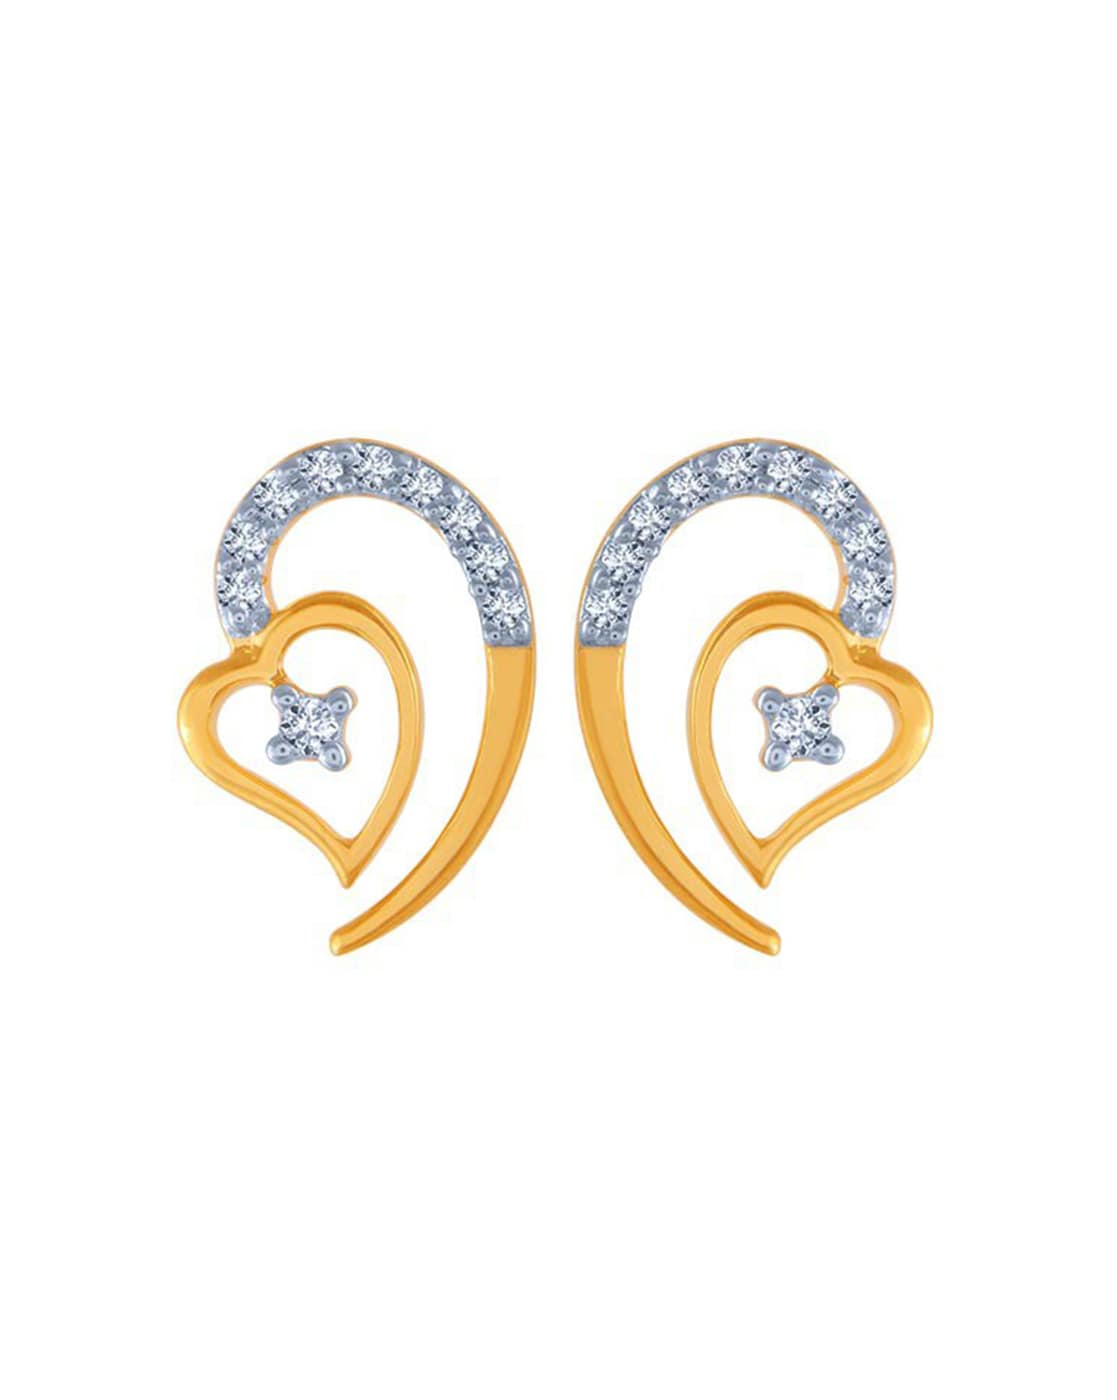 Elegant Gold Earrings to give you... - P.C. Chandra Jewellers | Facebook